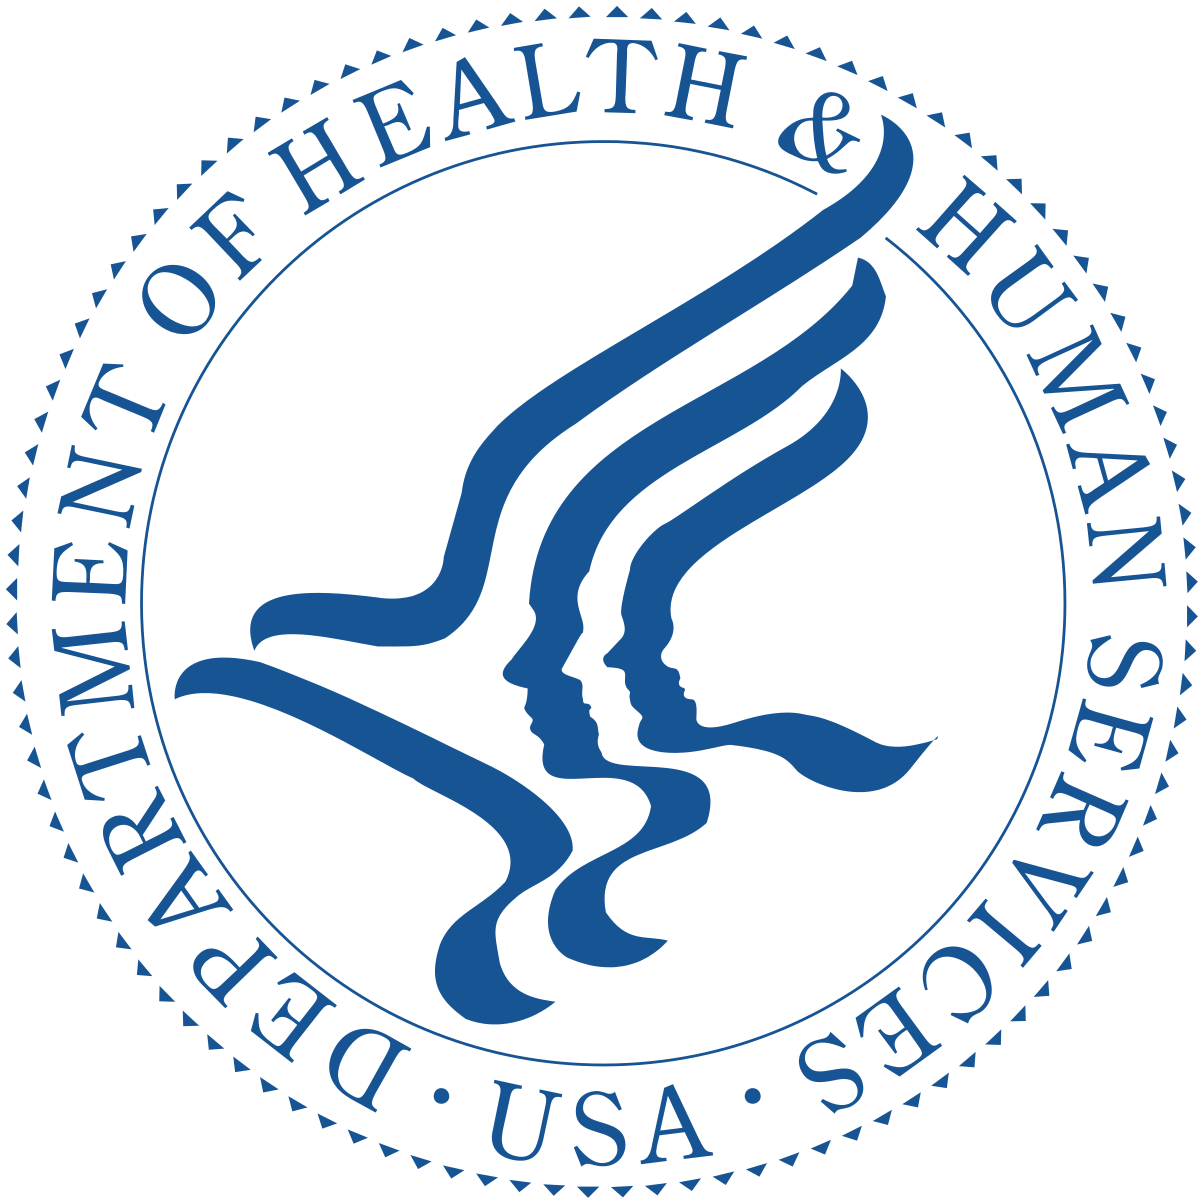 US Department of Health and Human Services logo